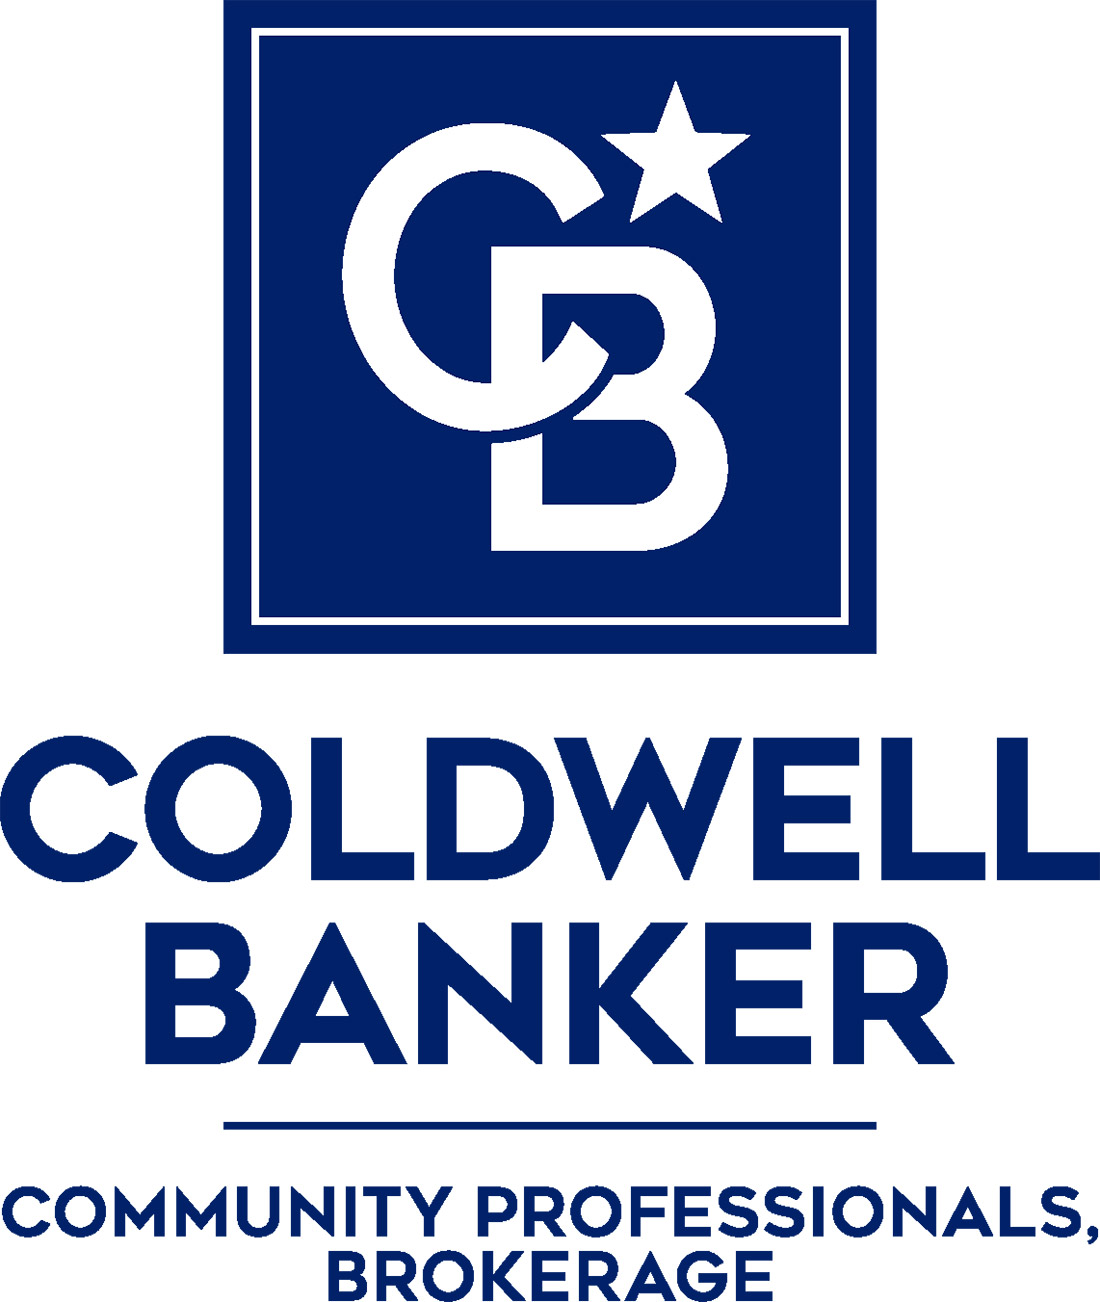 Diane Brown - Coldwell Banker Community Professionals Logo